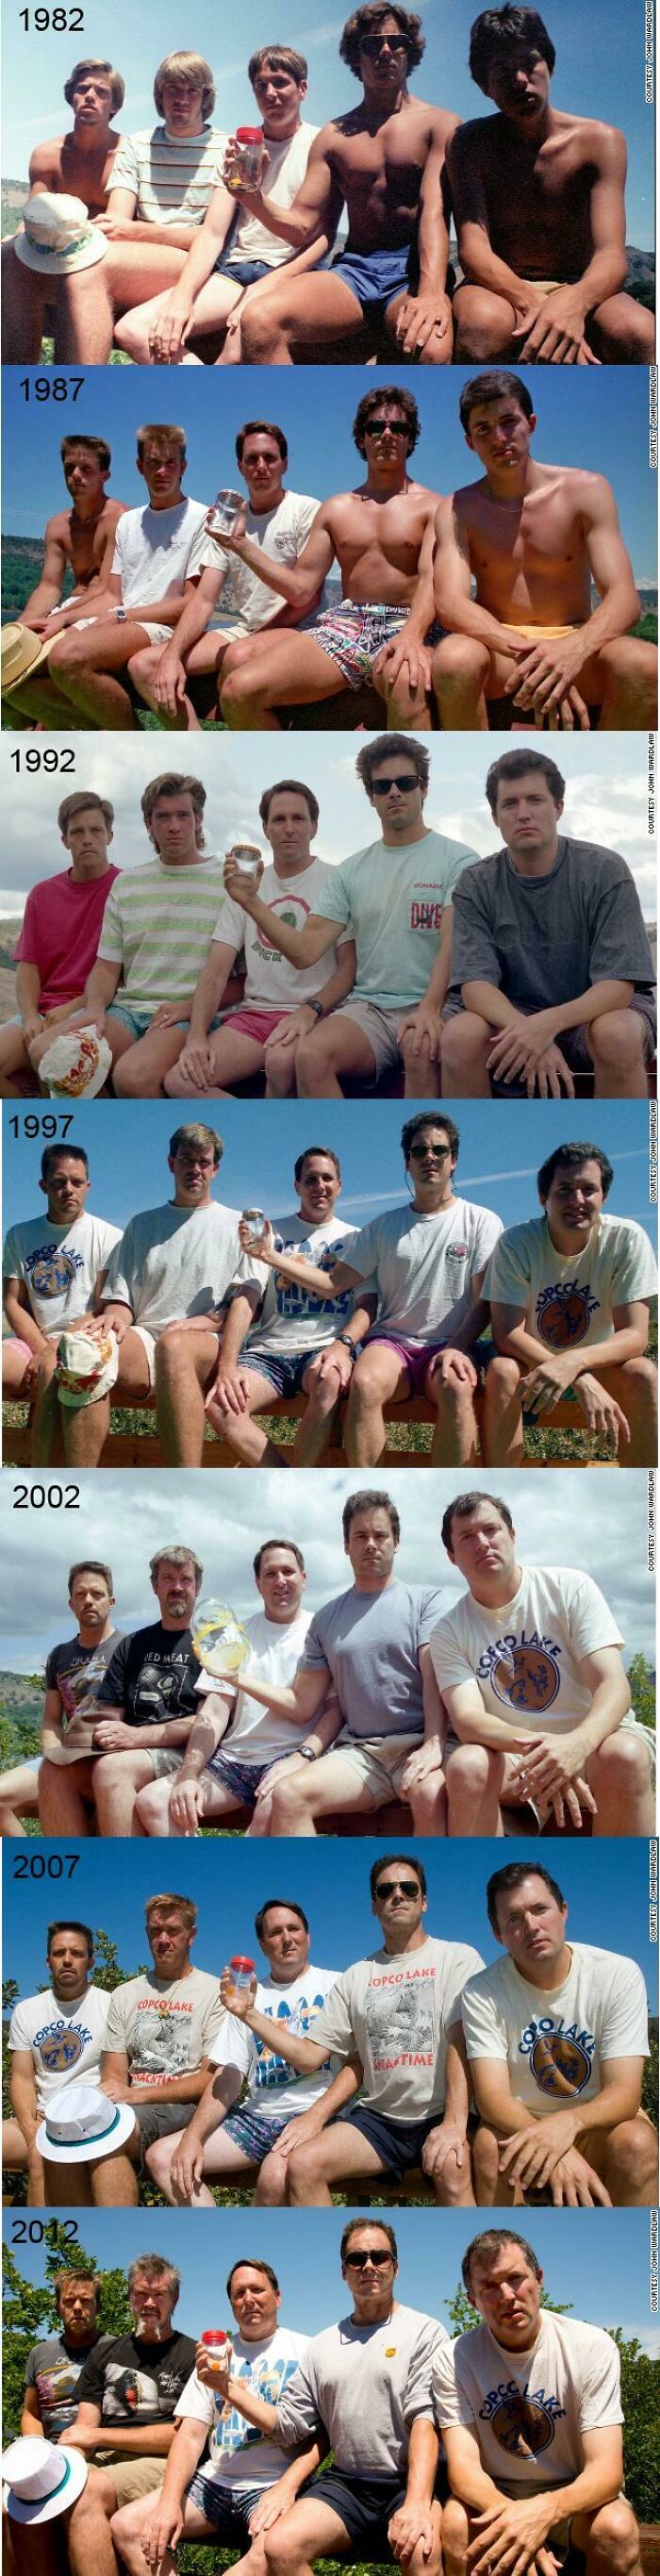 Every Five Years From 1982-2012, Five Men Take The Same Photo At Their Cabin At Copco Lake In California. They Plan On Adding A 2017 Photo This Summer.